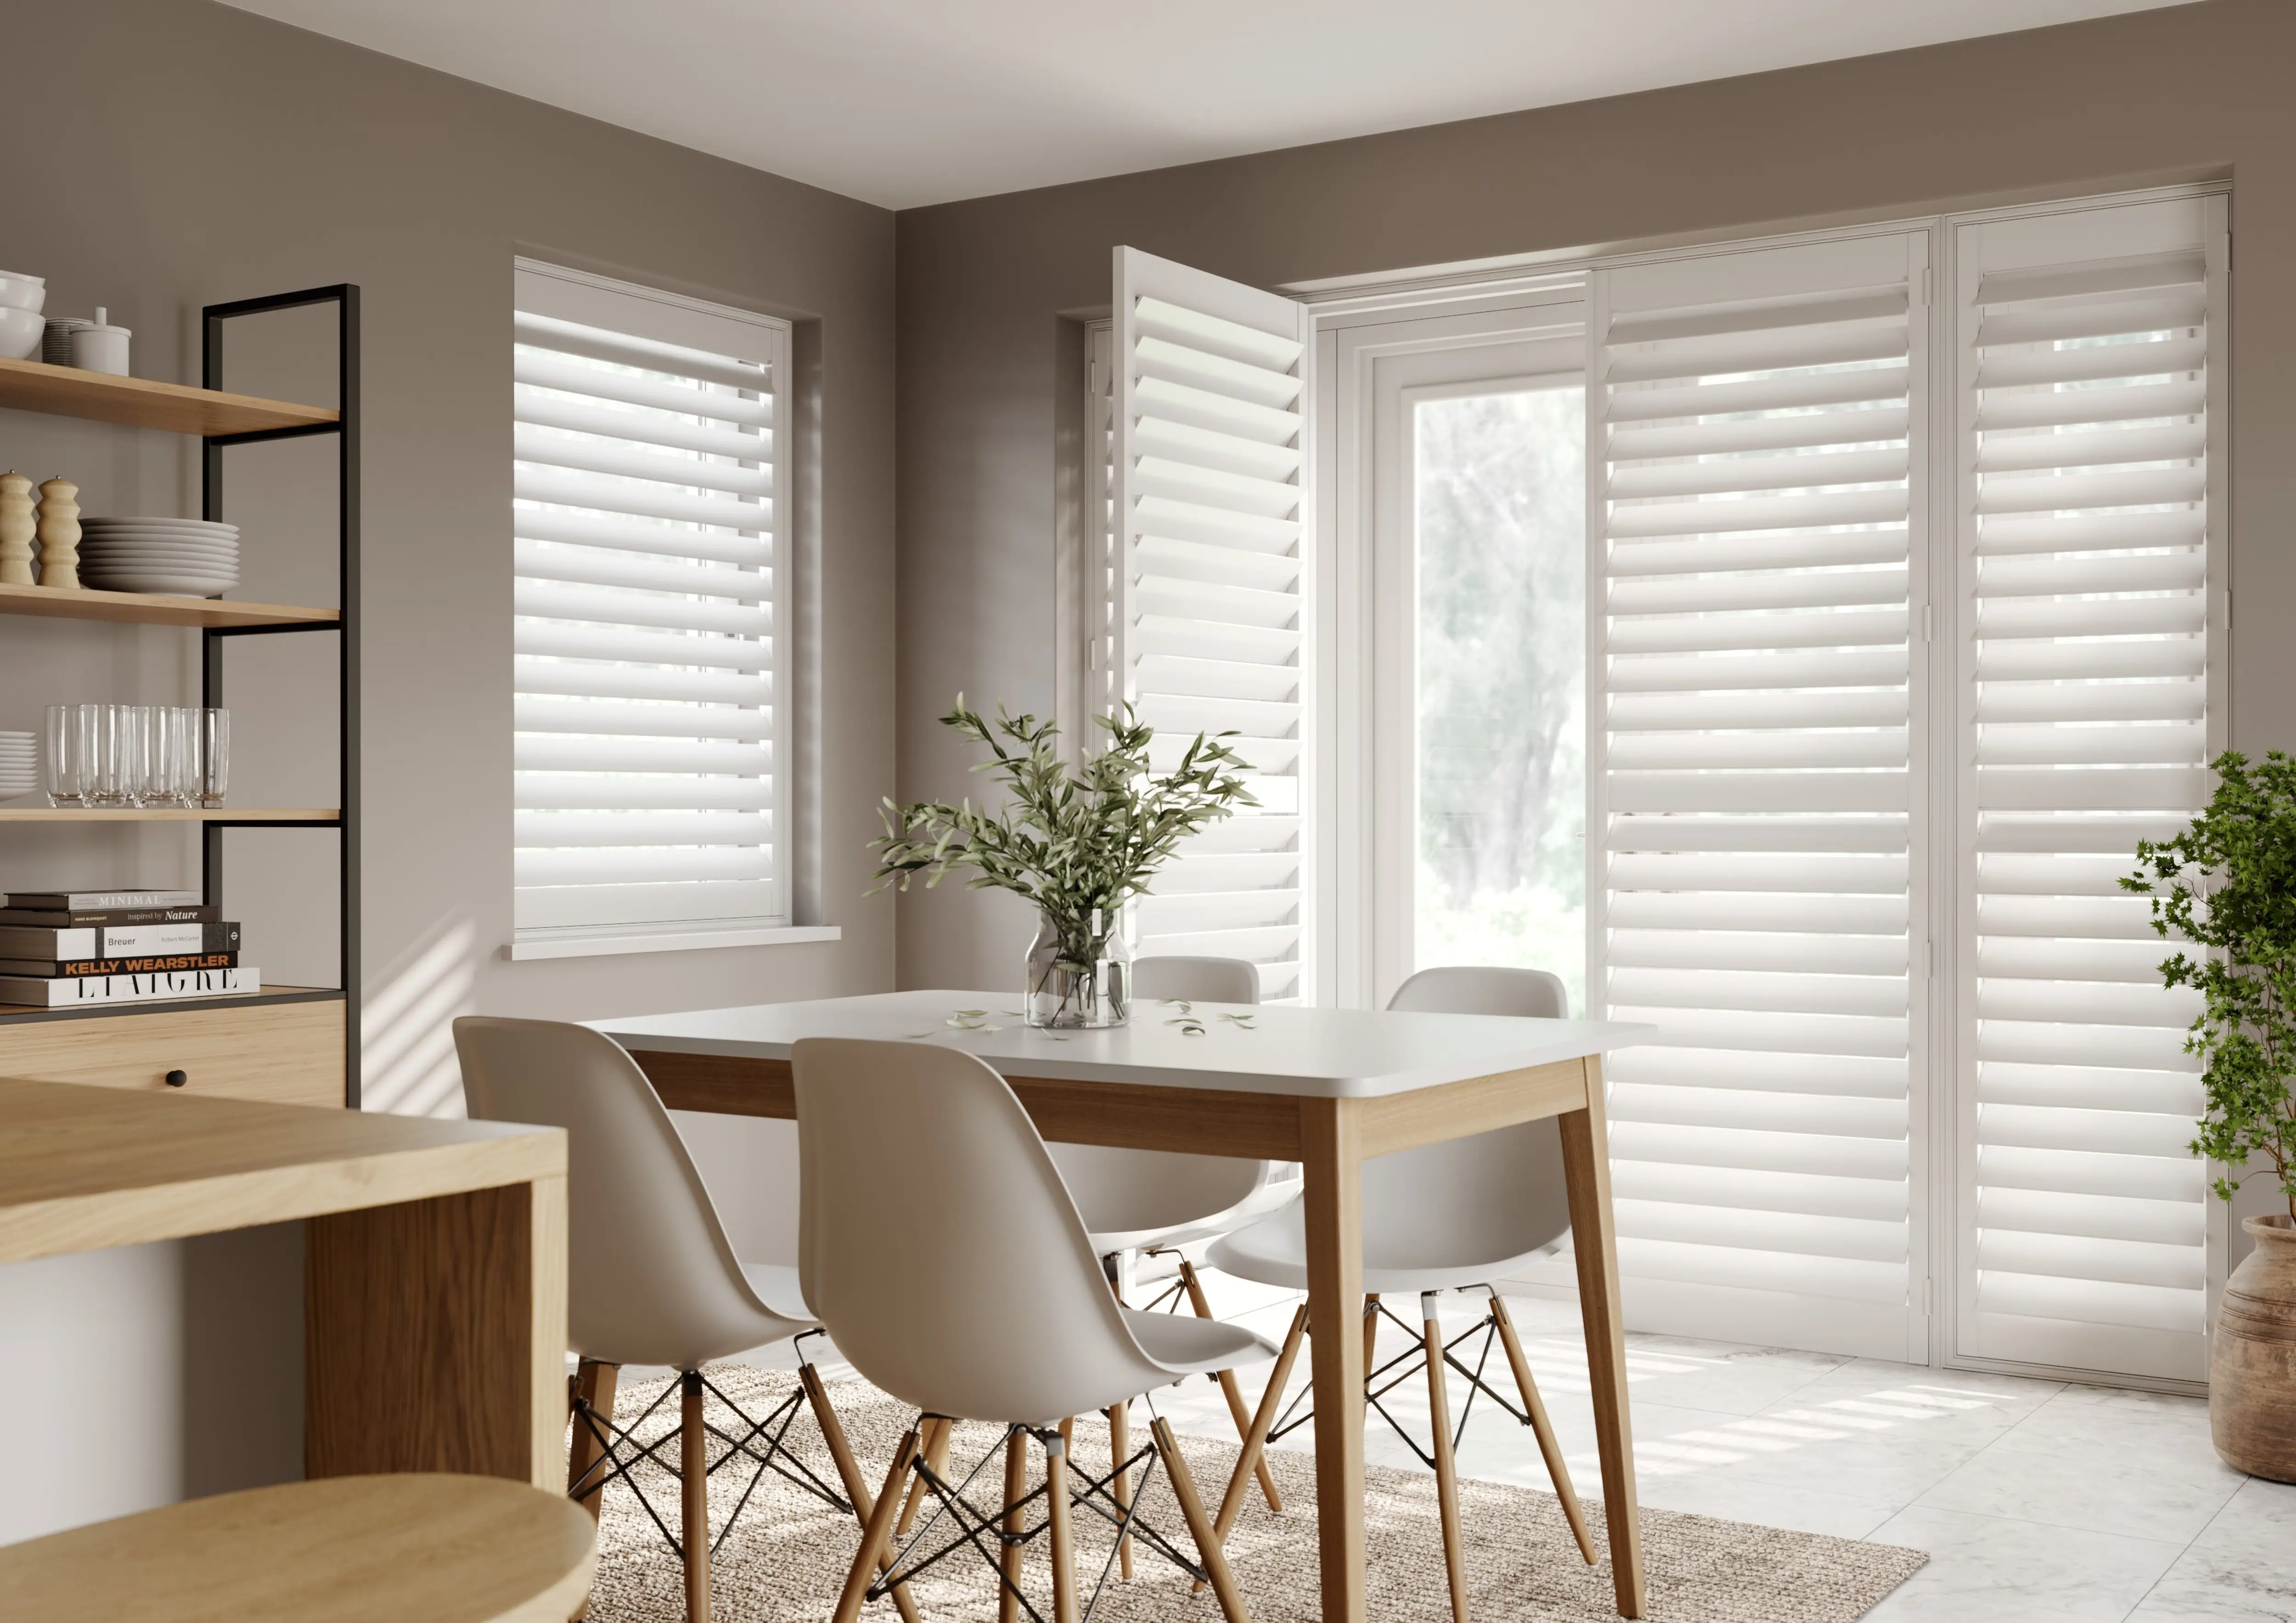 Dining room doors with Vivid White shutters